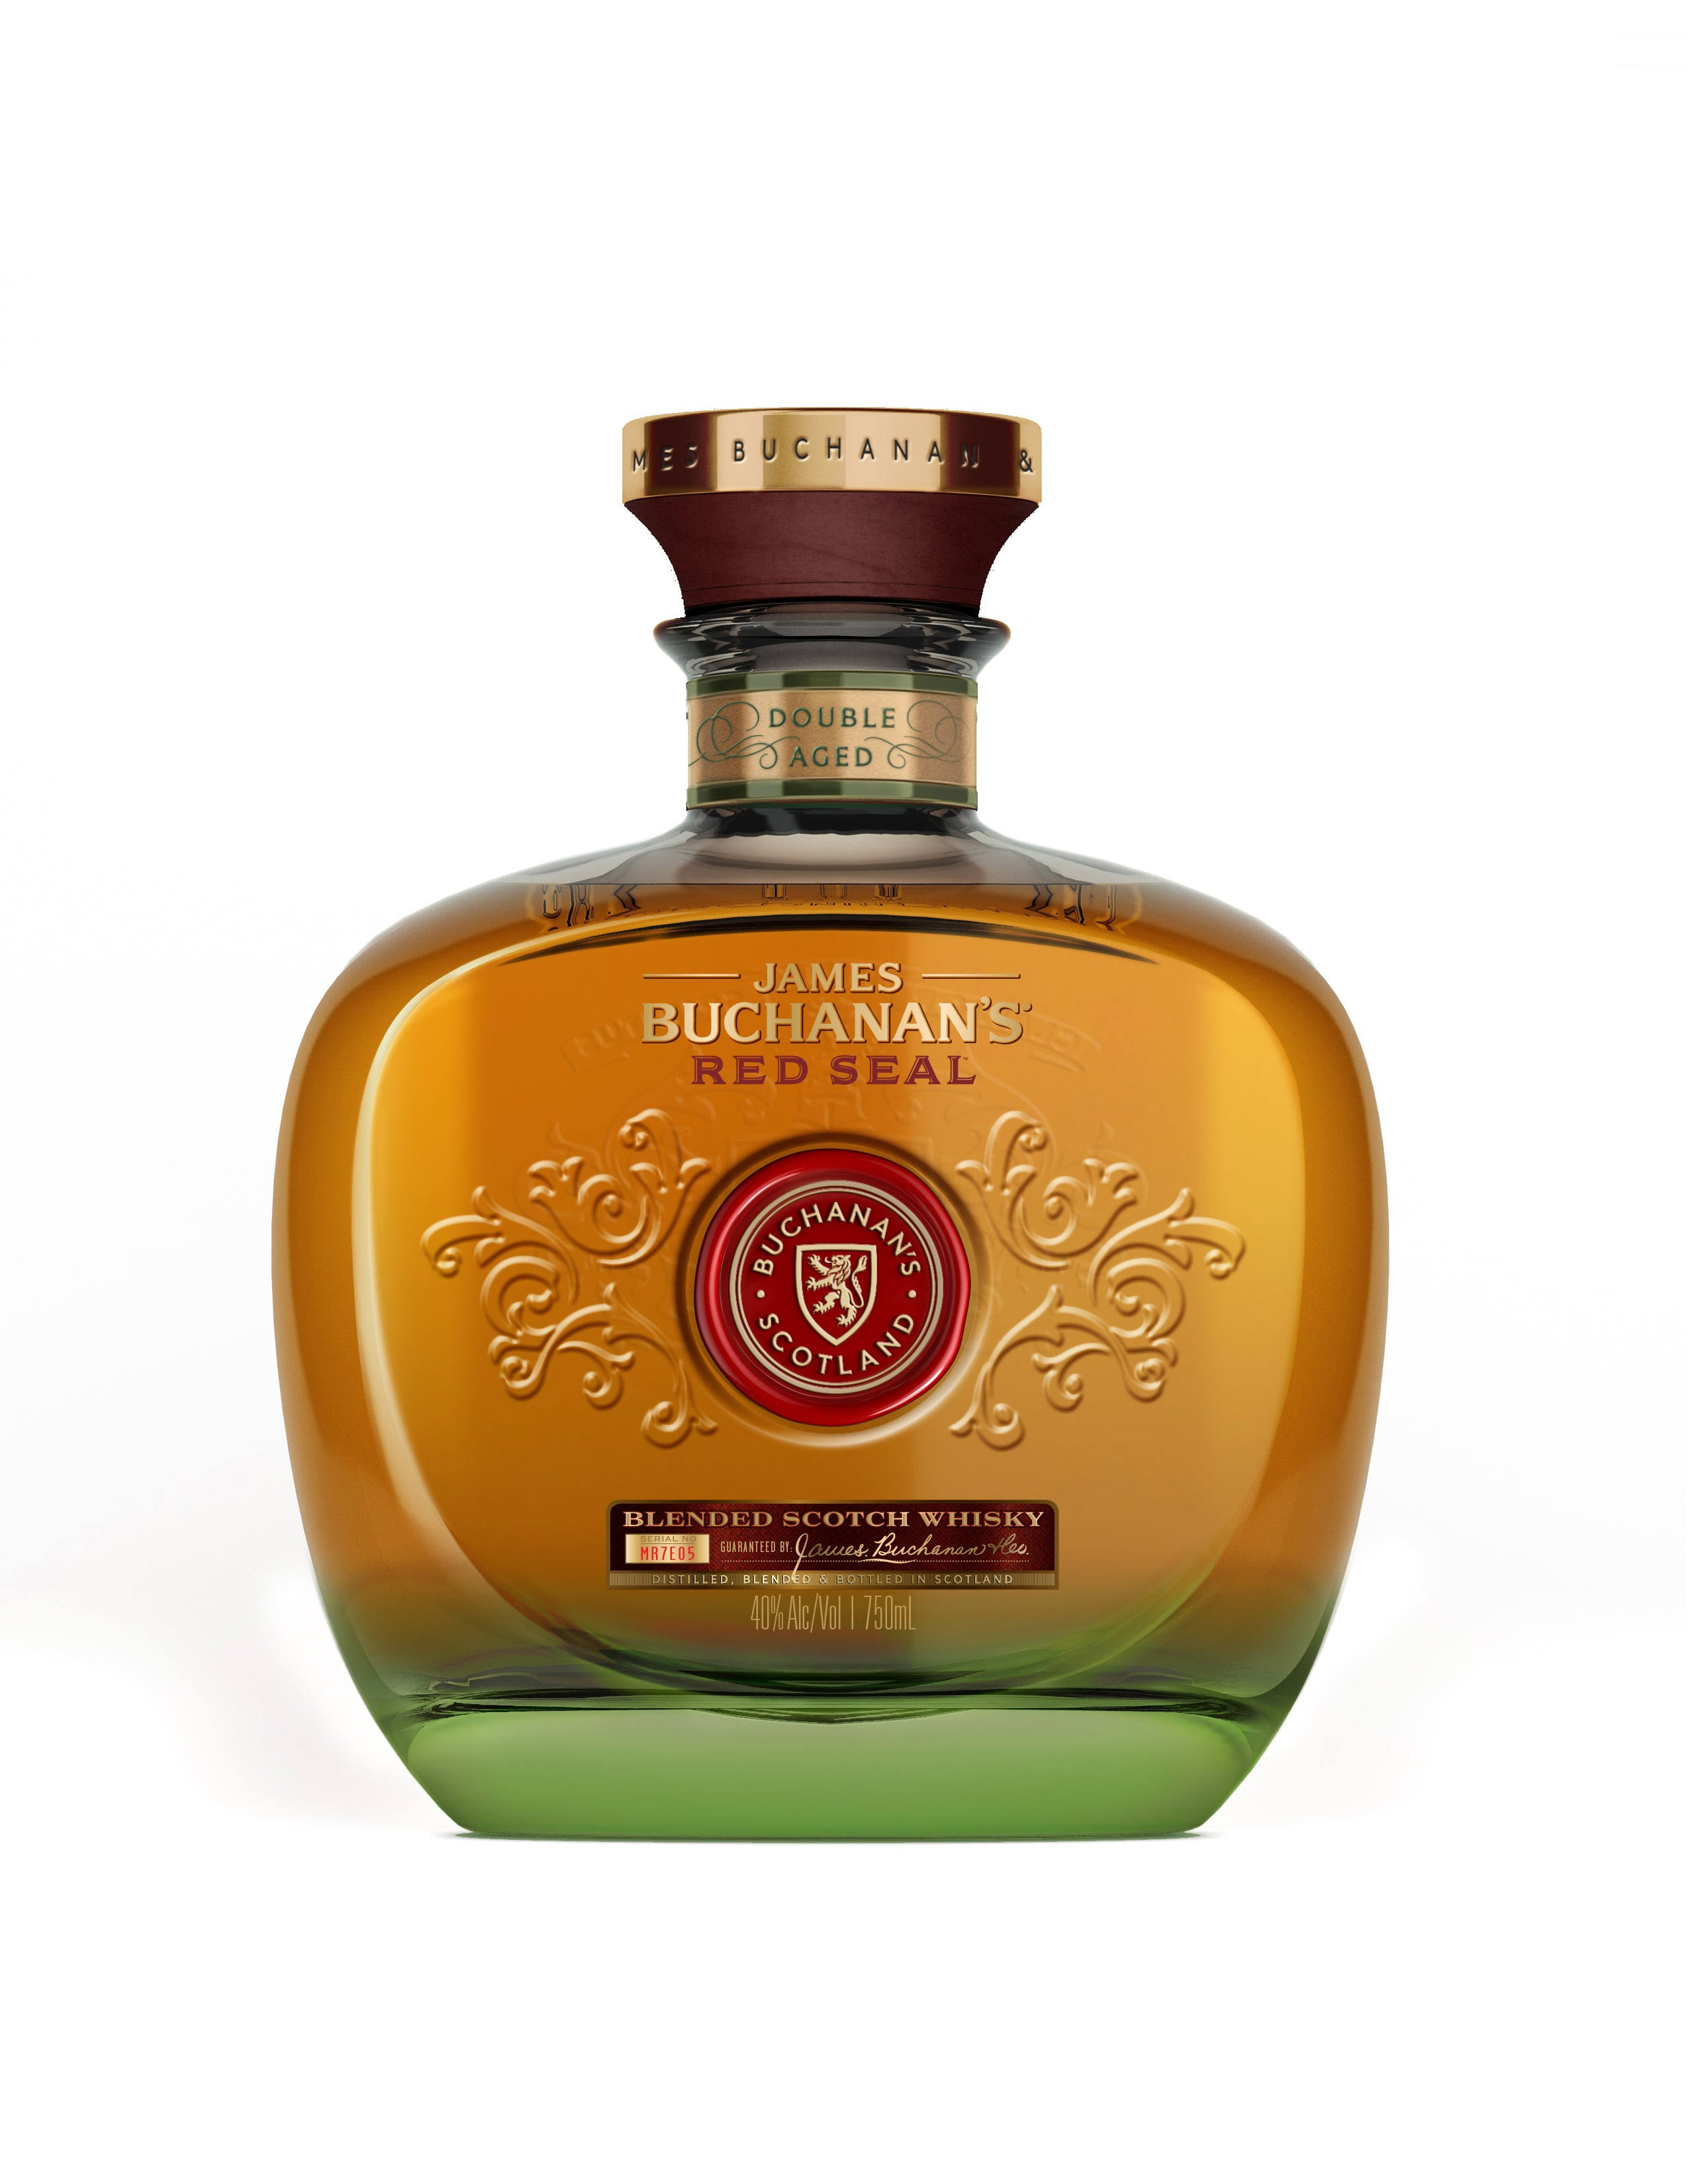 Buchanan's Red Seal Blended Scotch Whisky - 750ml